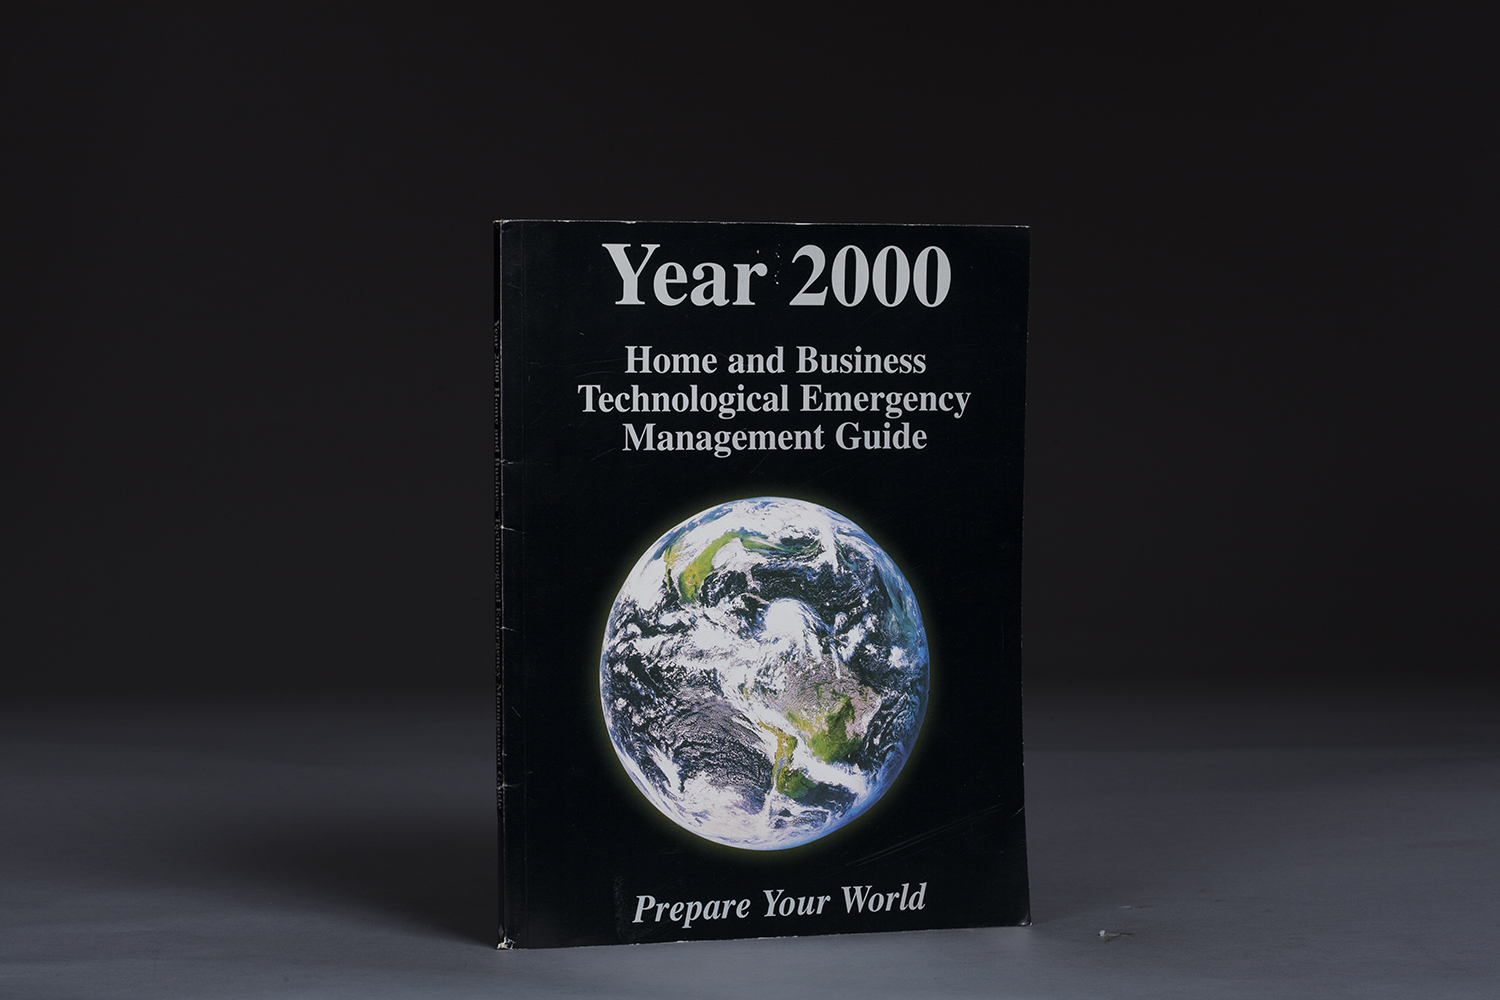 Year 2000 Home and Business Tech Emergency Management Guide - 0985 Cover.jpg